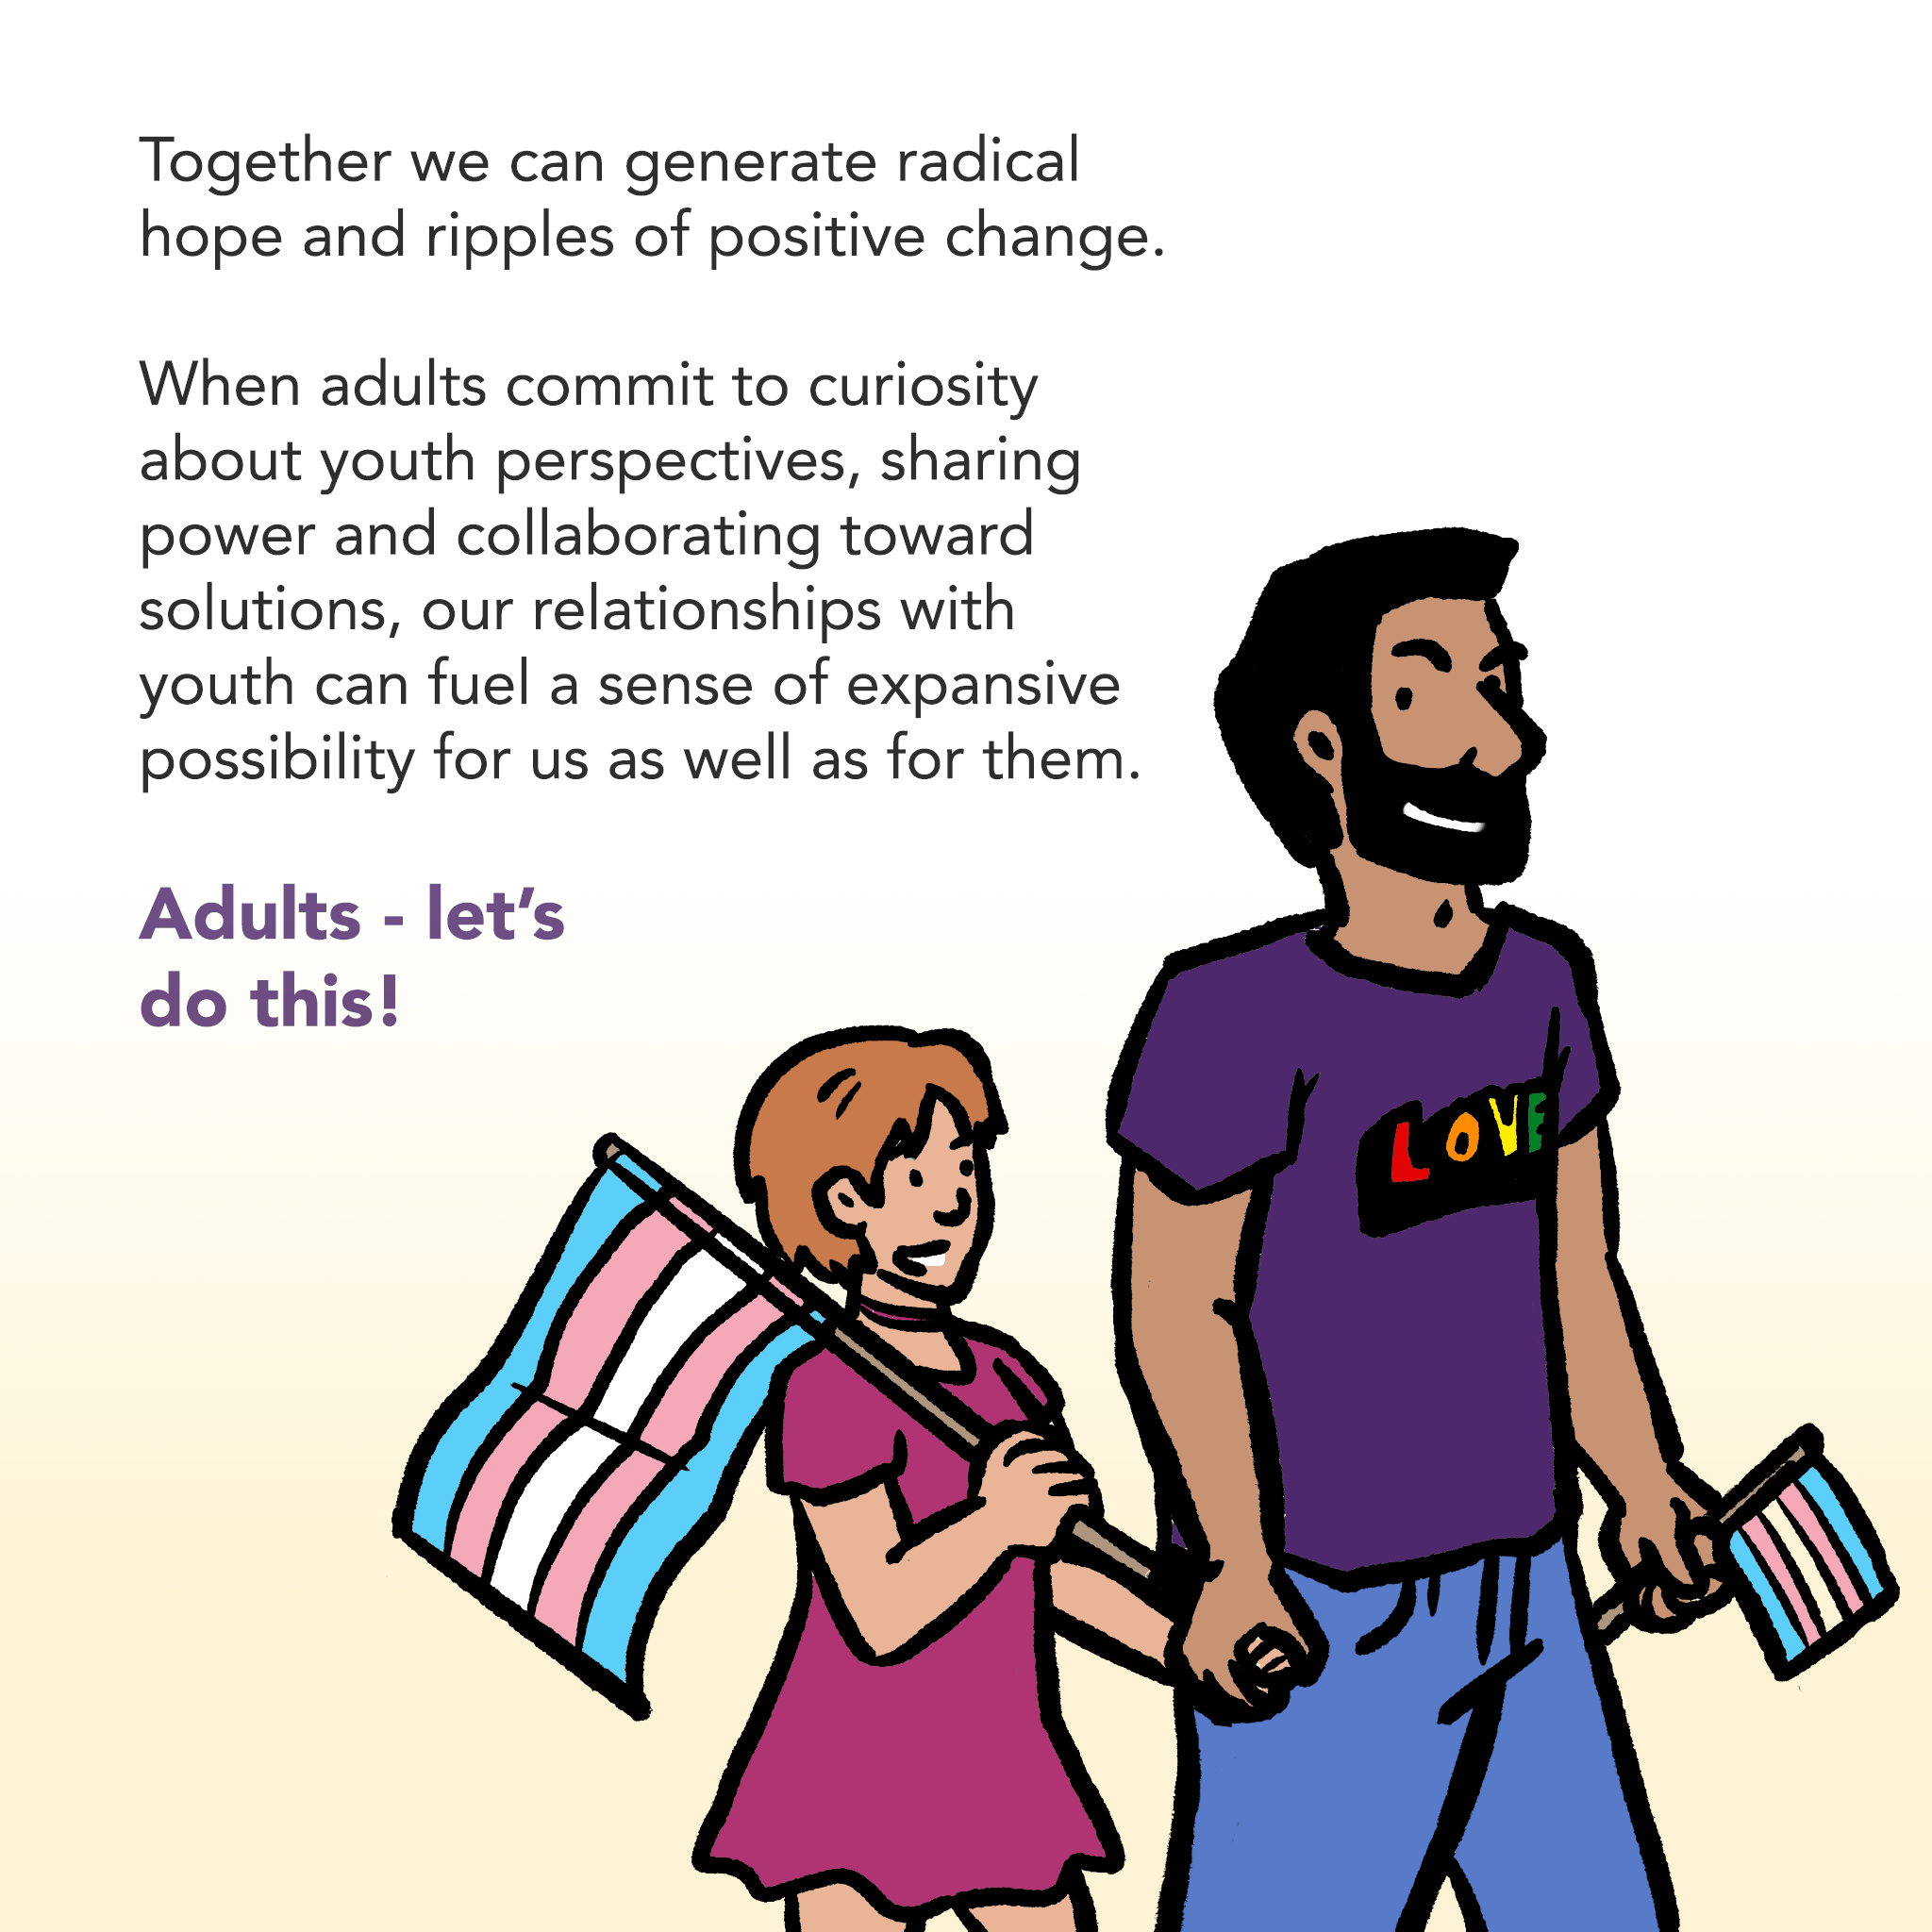 Image of an adult and a young person smiling, holding hands and walking, carrying striped flags. Caption says "Together we can generate radical hope and ripples of positive change. When adults commit to curiosity about youth perspectives, sharing power and collaborating toward solutions, our relationships with youth can fuel a sense of expansive possibility for us as well as for them. Adults - let’s do this!"